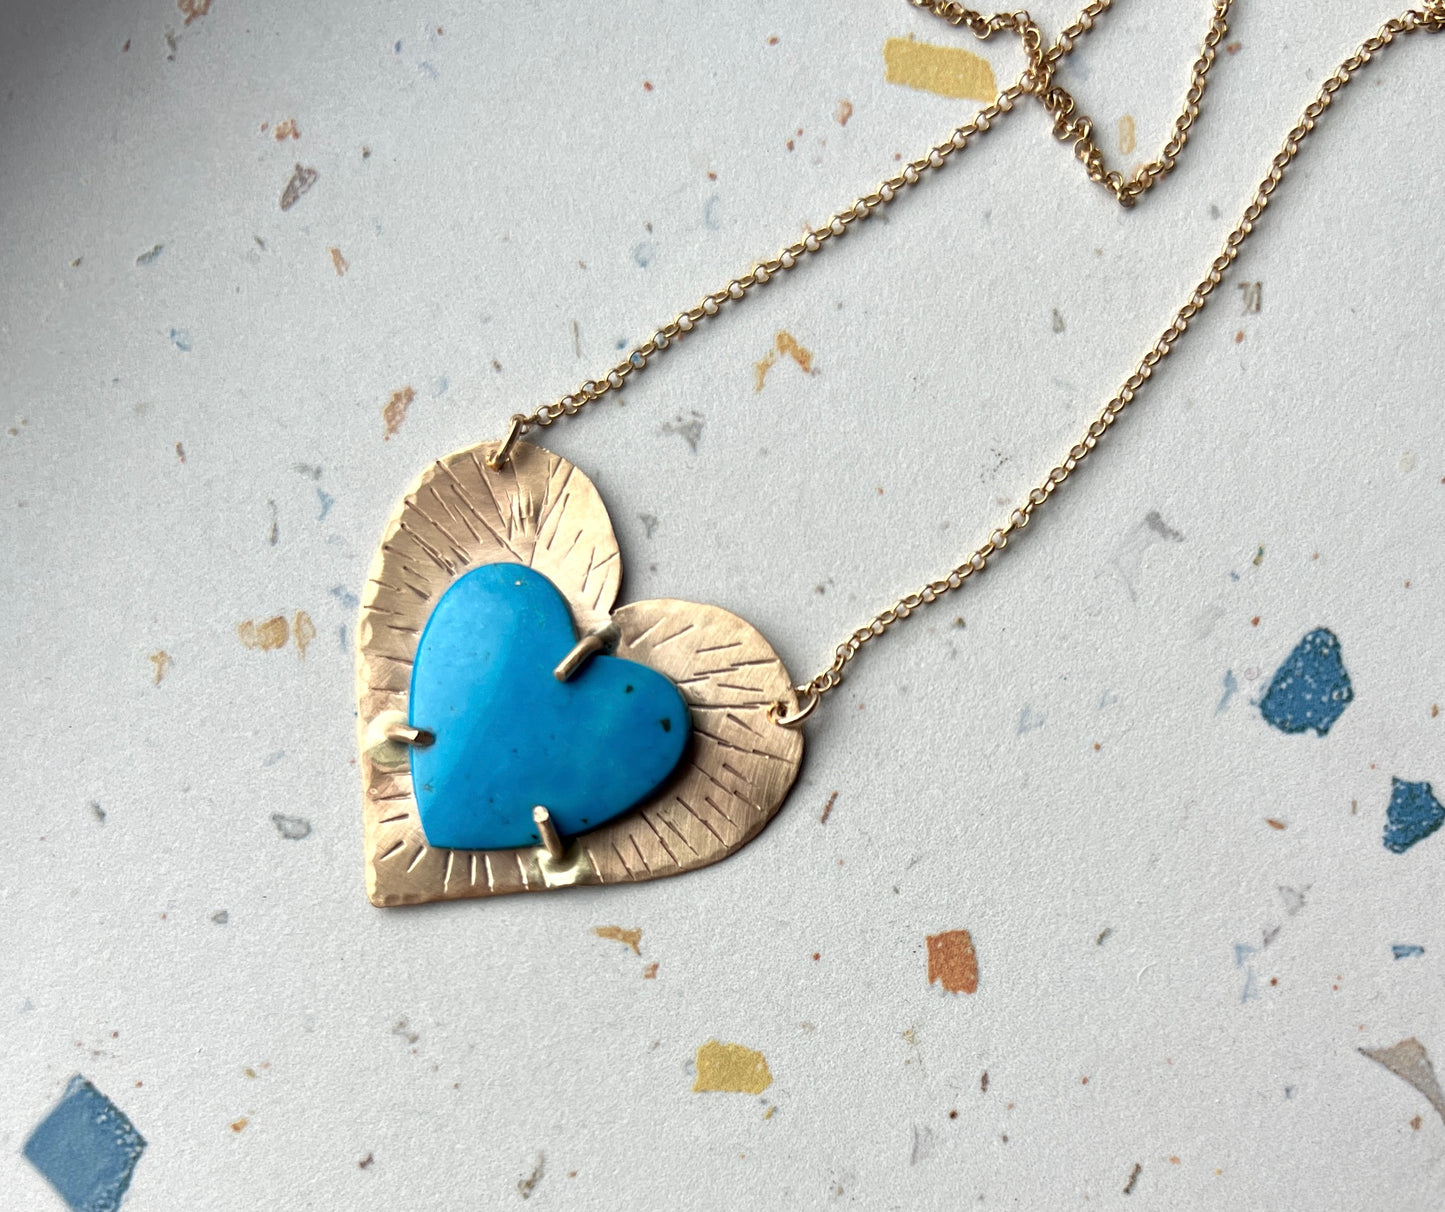 Turquoise Heart Necklace in 14k goldfill